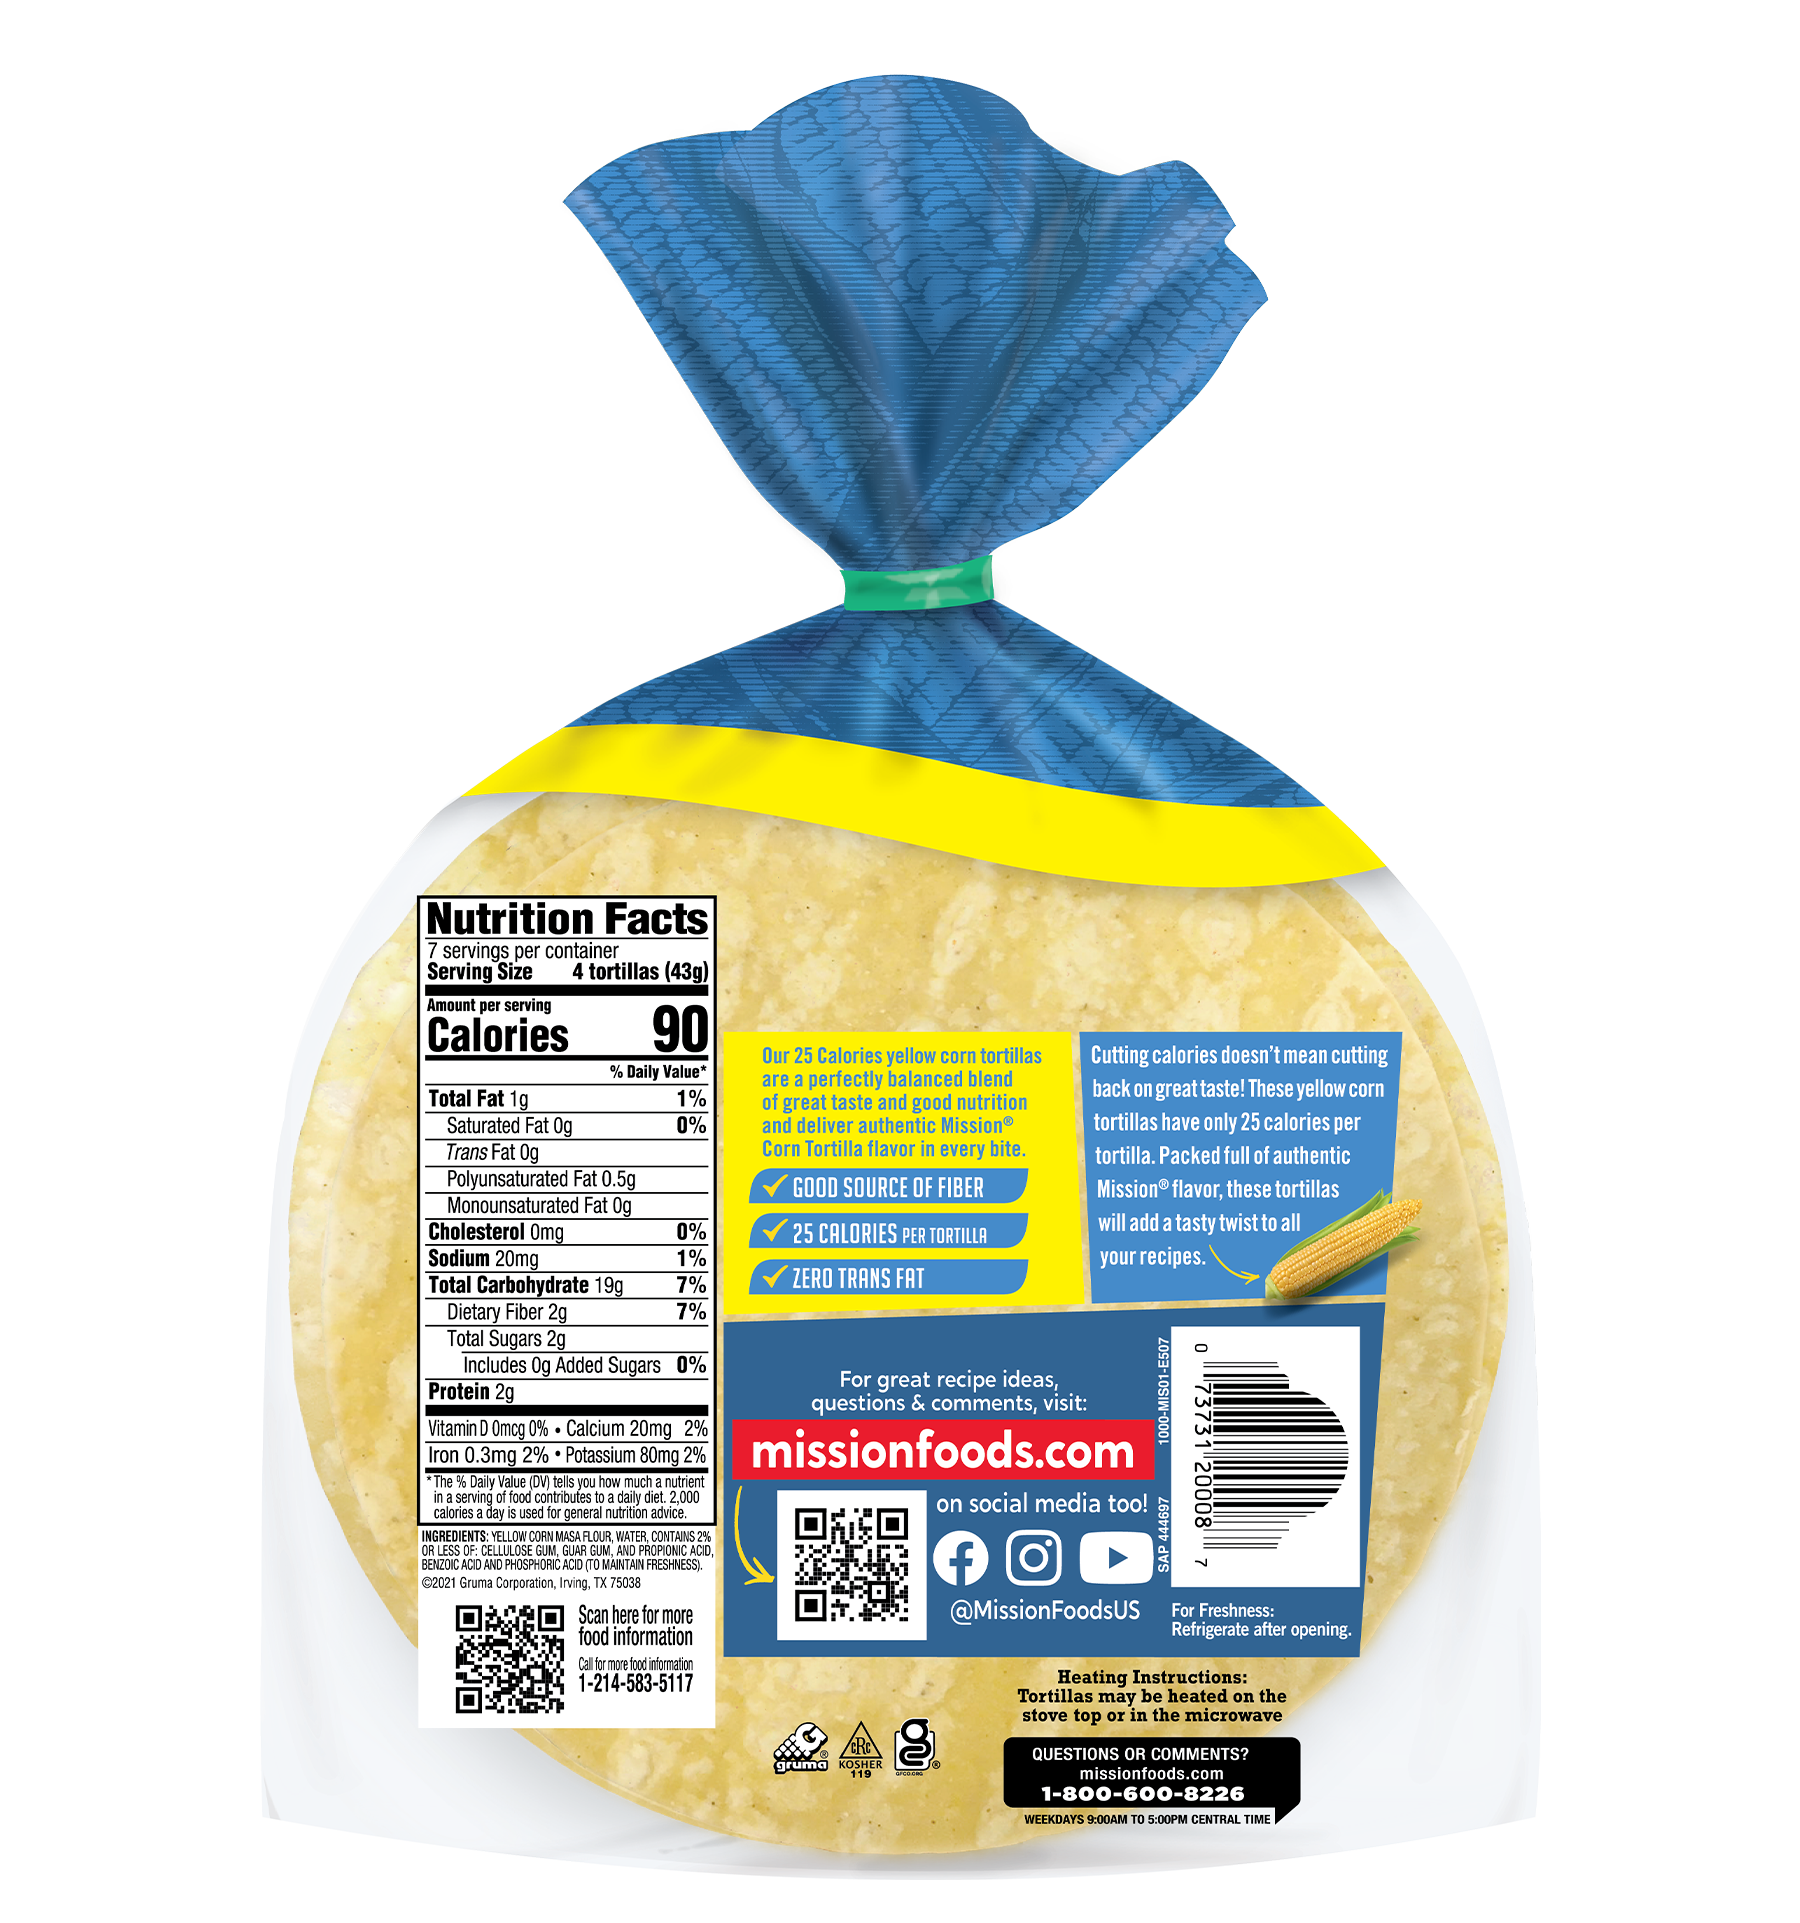 Low Calorie Yellow Corn Tortillas - Mission Foods